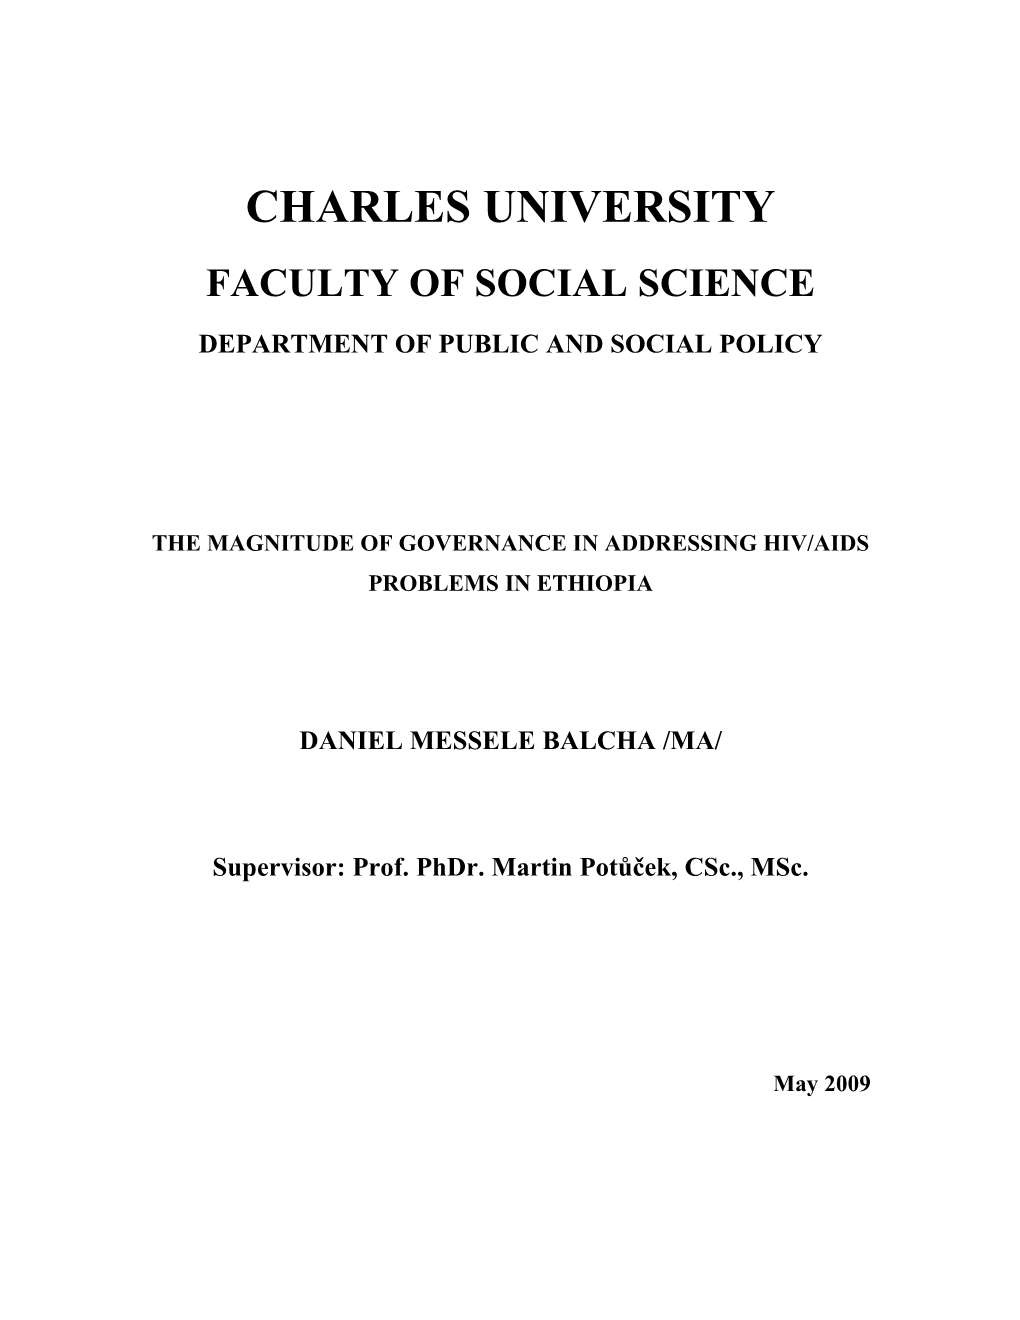 Department of Public and Social Policy